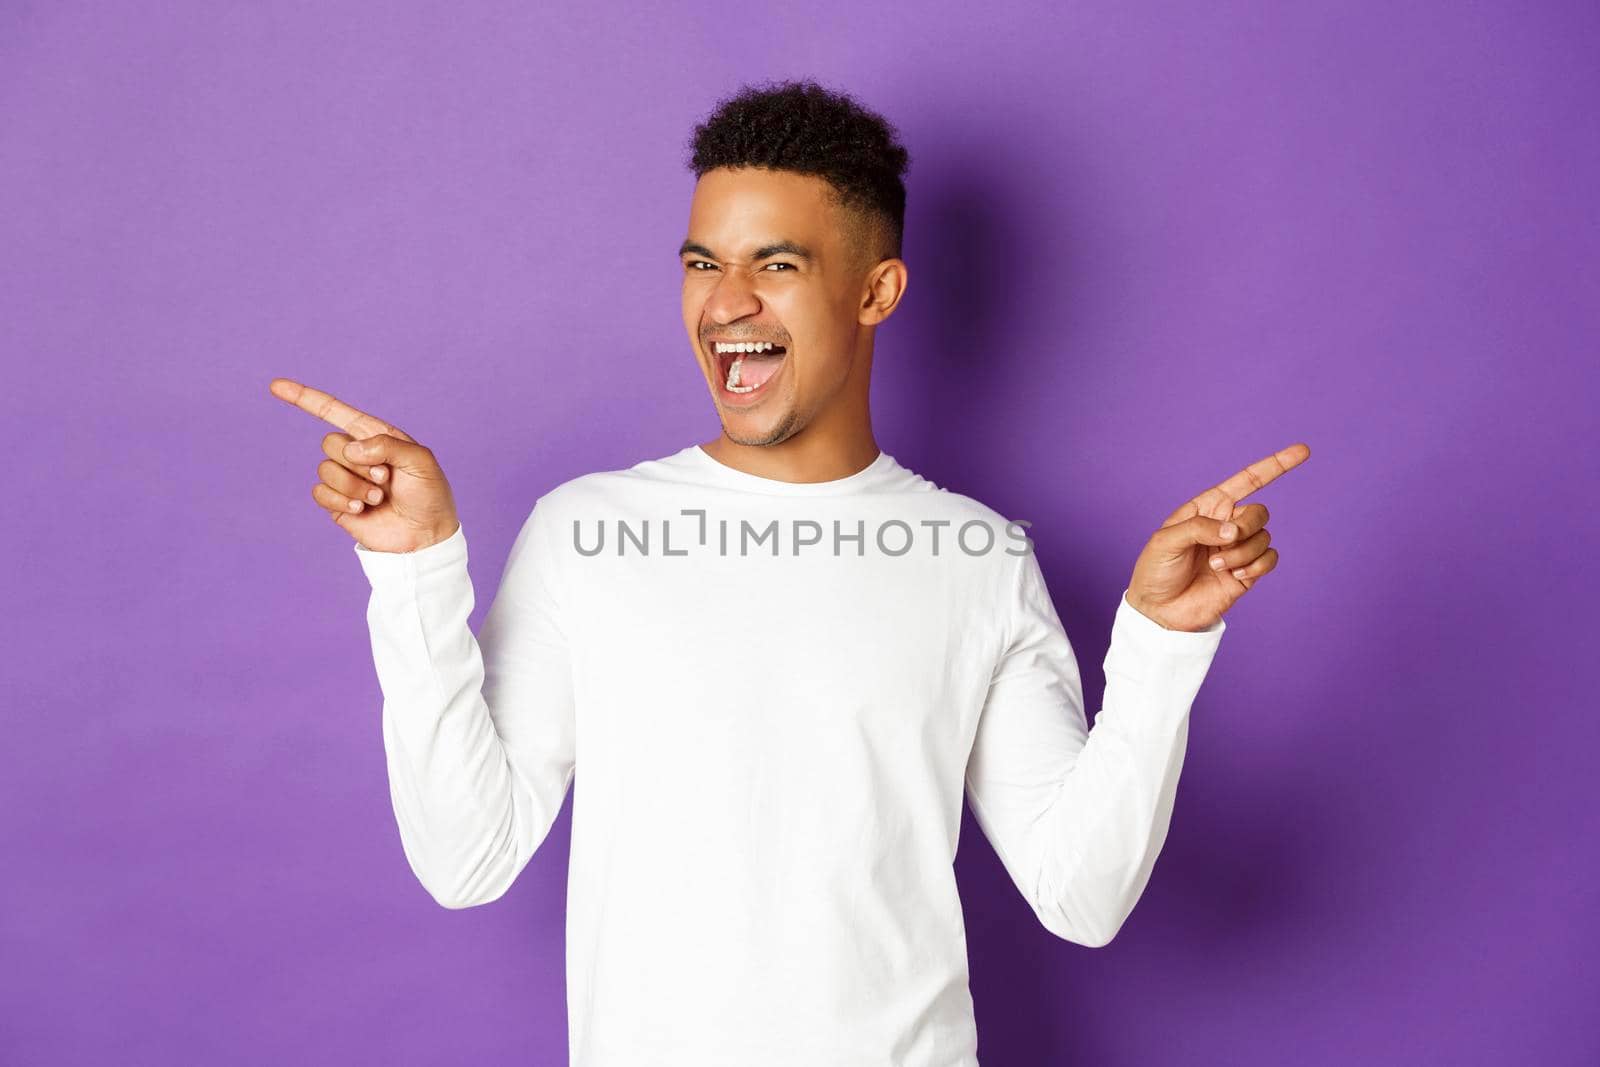 Image of cheerful african-american guy in white sweatshirt, showing two variants, pointing fingers sideways at copy space and smiling, demonstrate products, purple background.